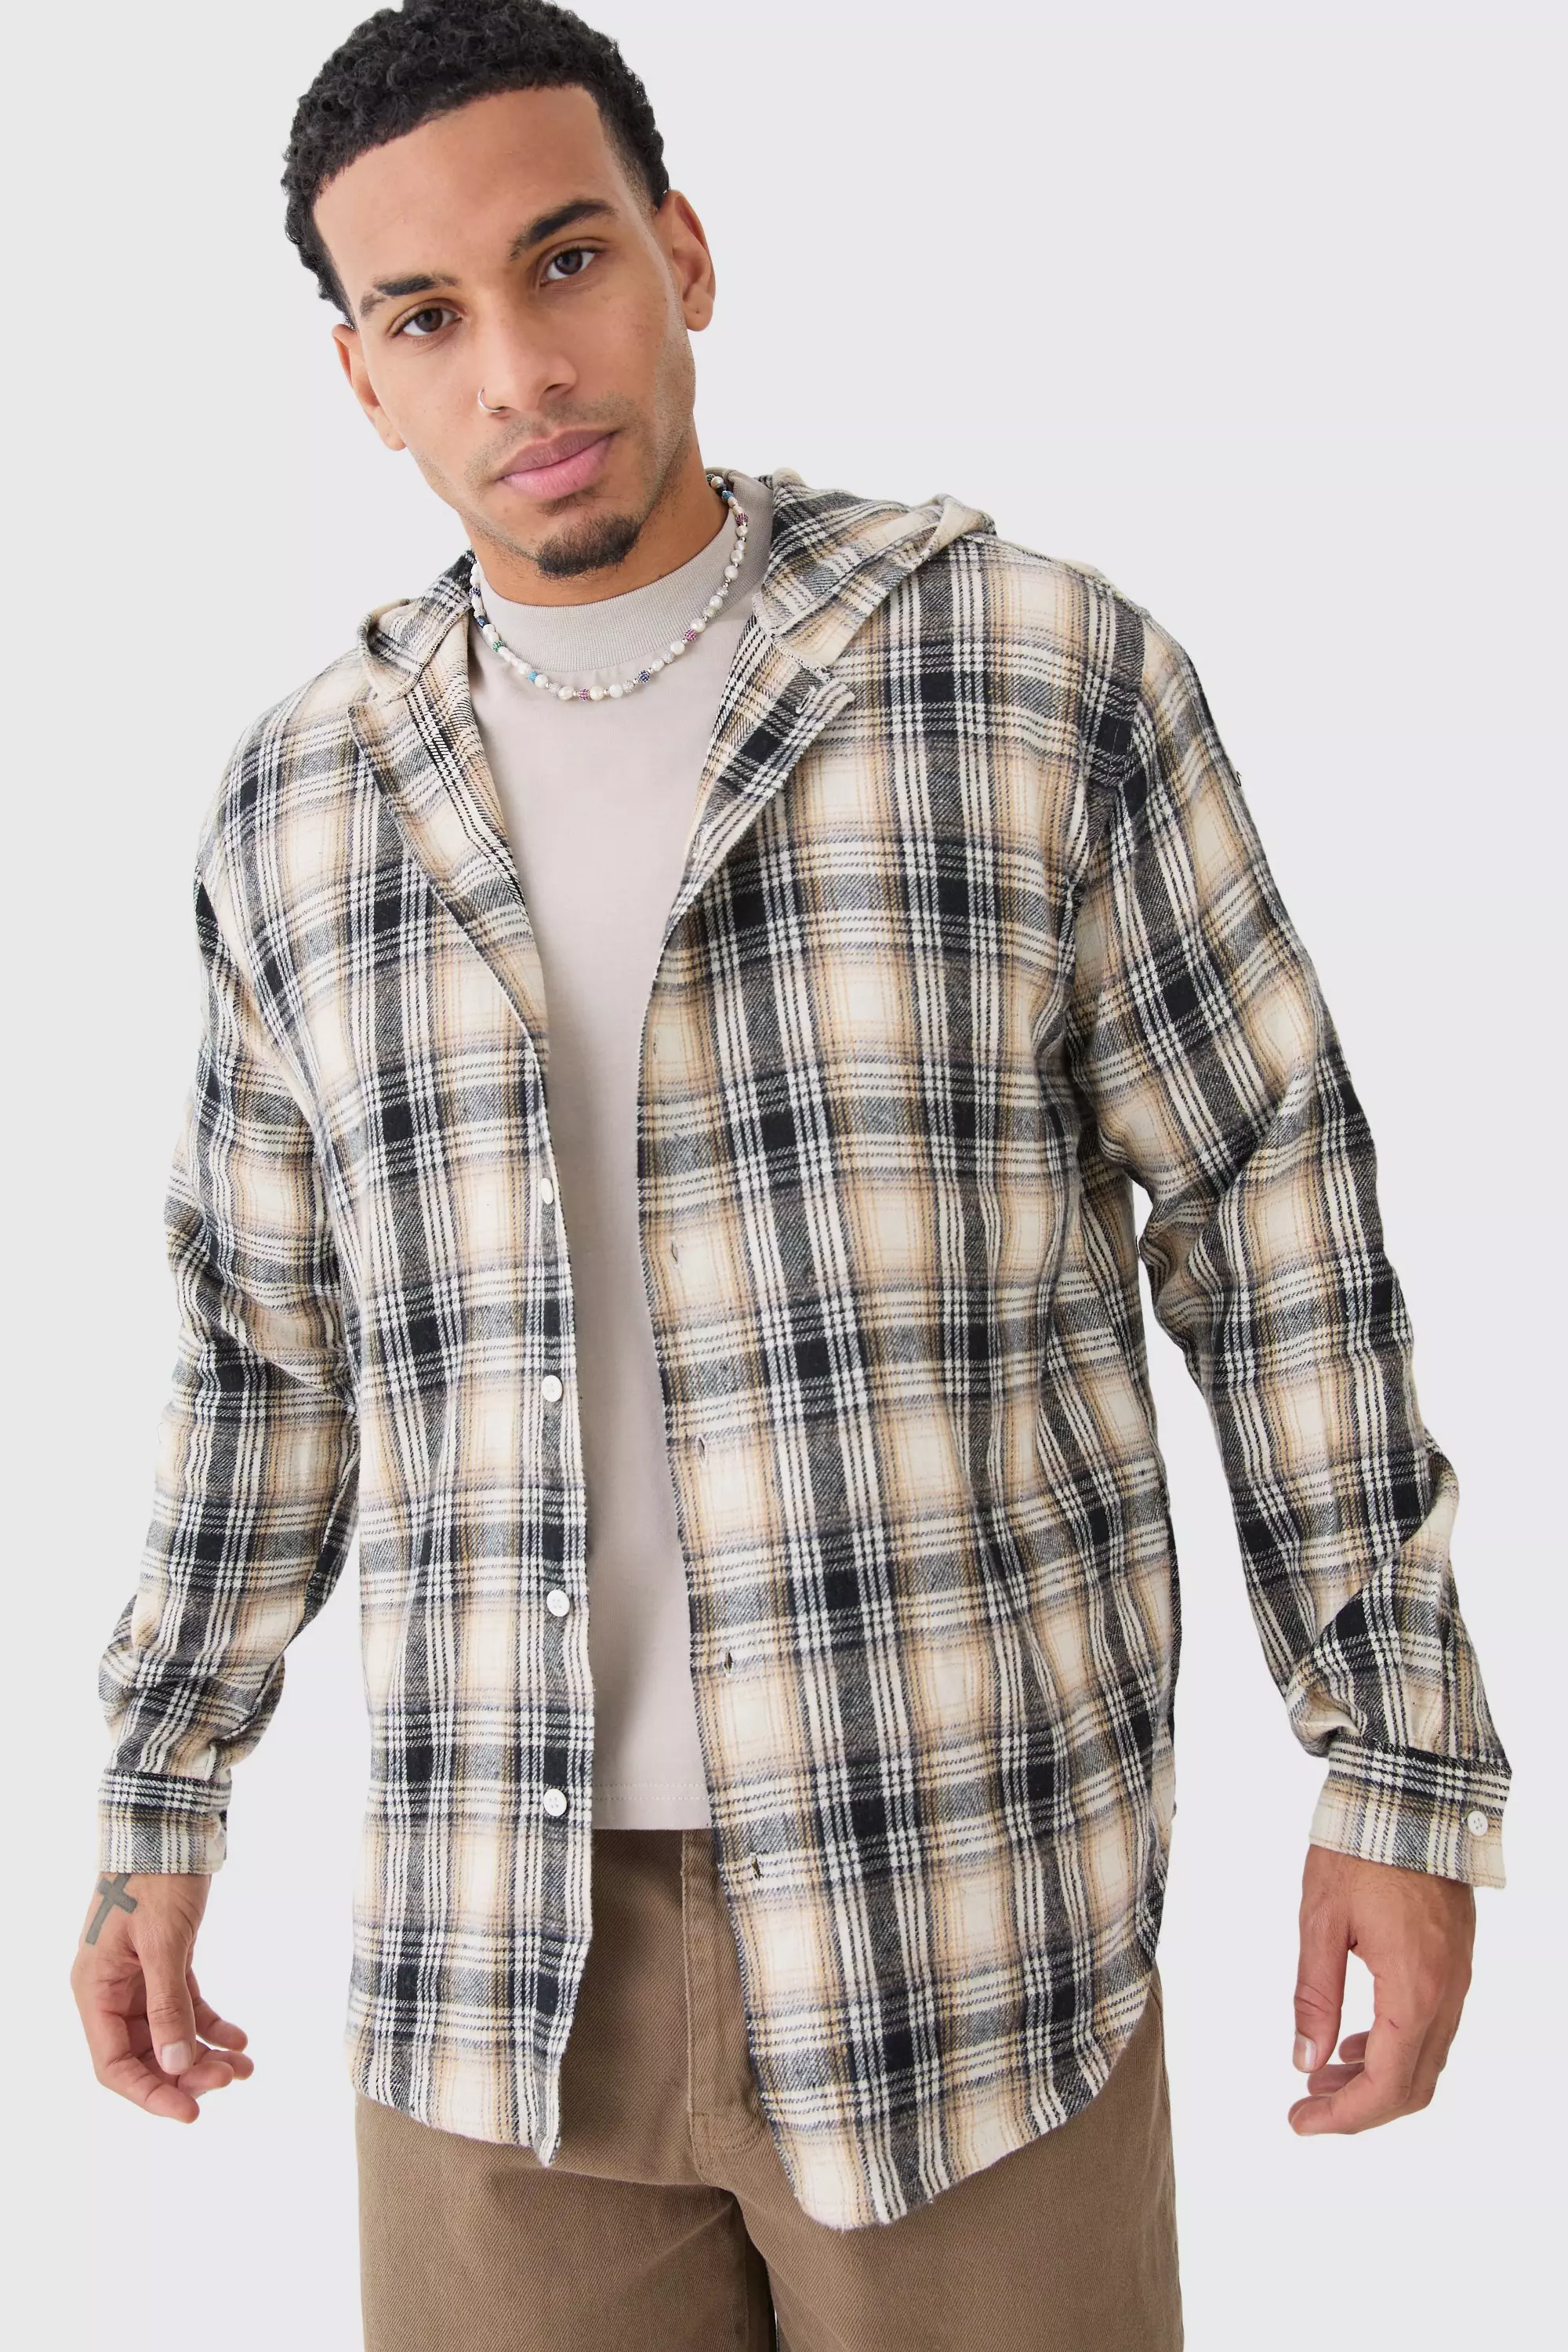 Men's Hooded Checked Shirts